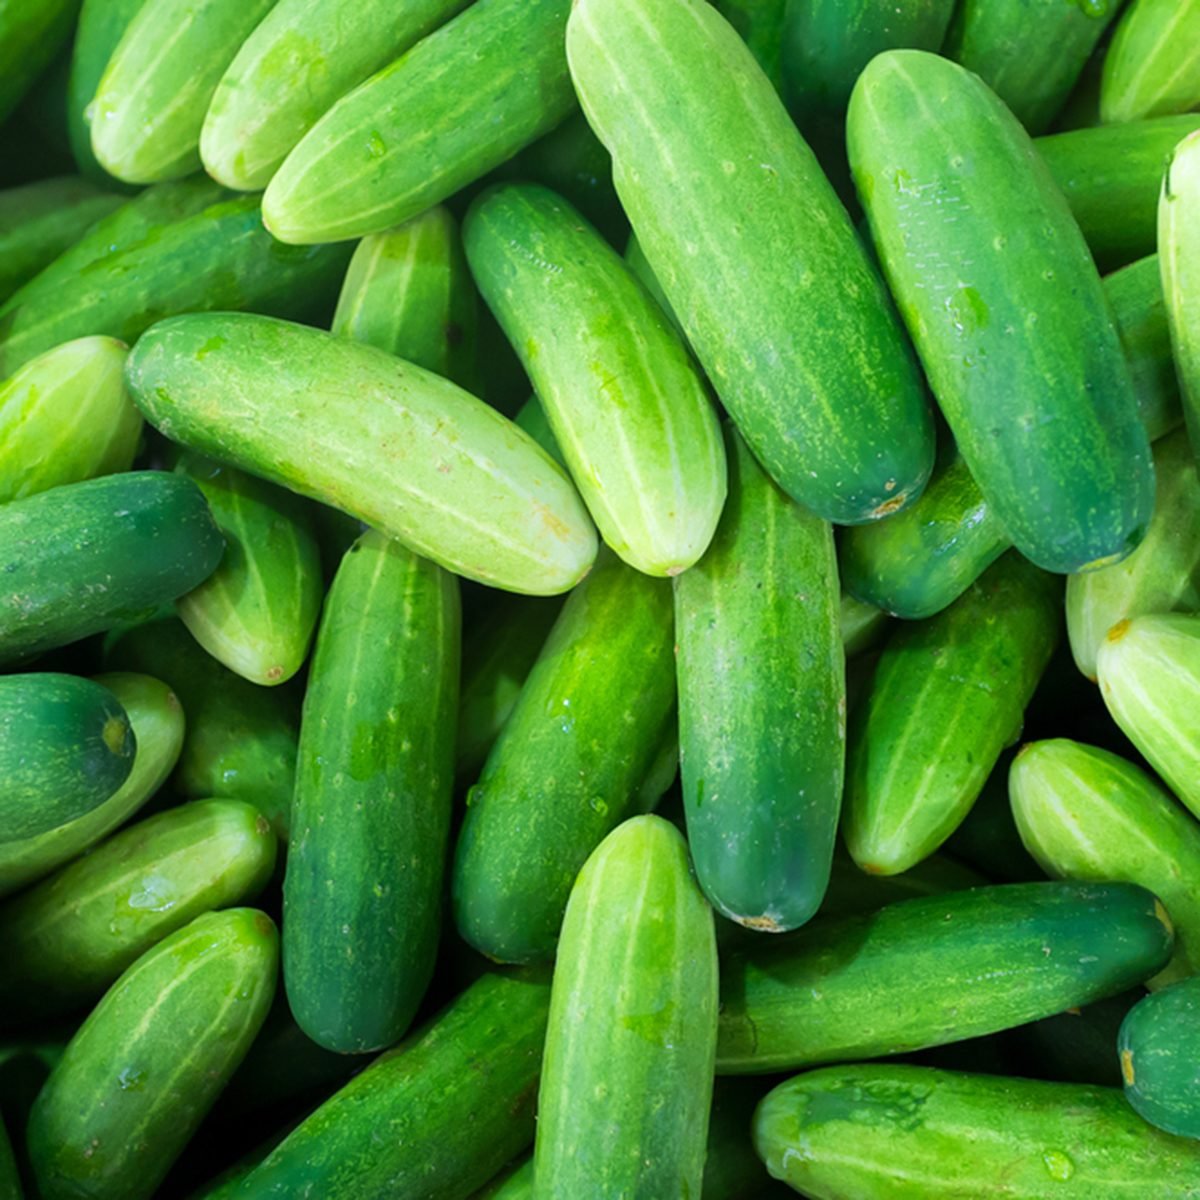 6-popular-cucumber-varieties-and-how-to-use-them